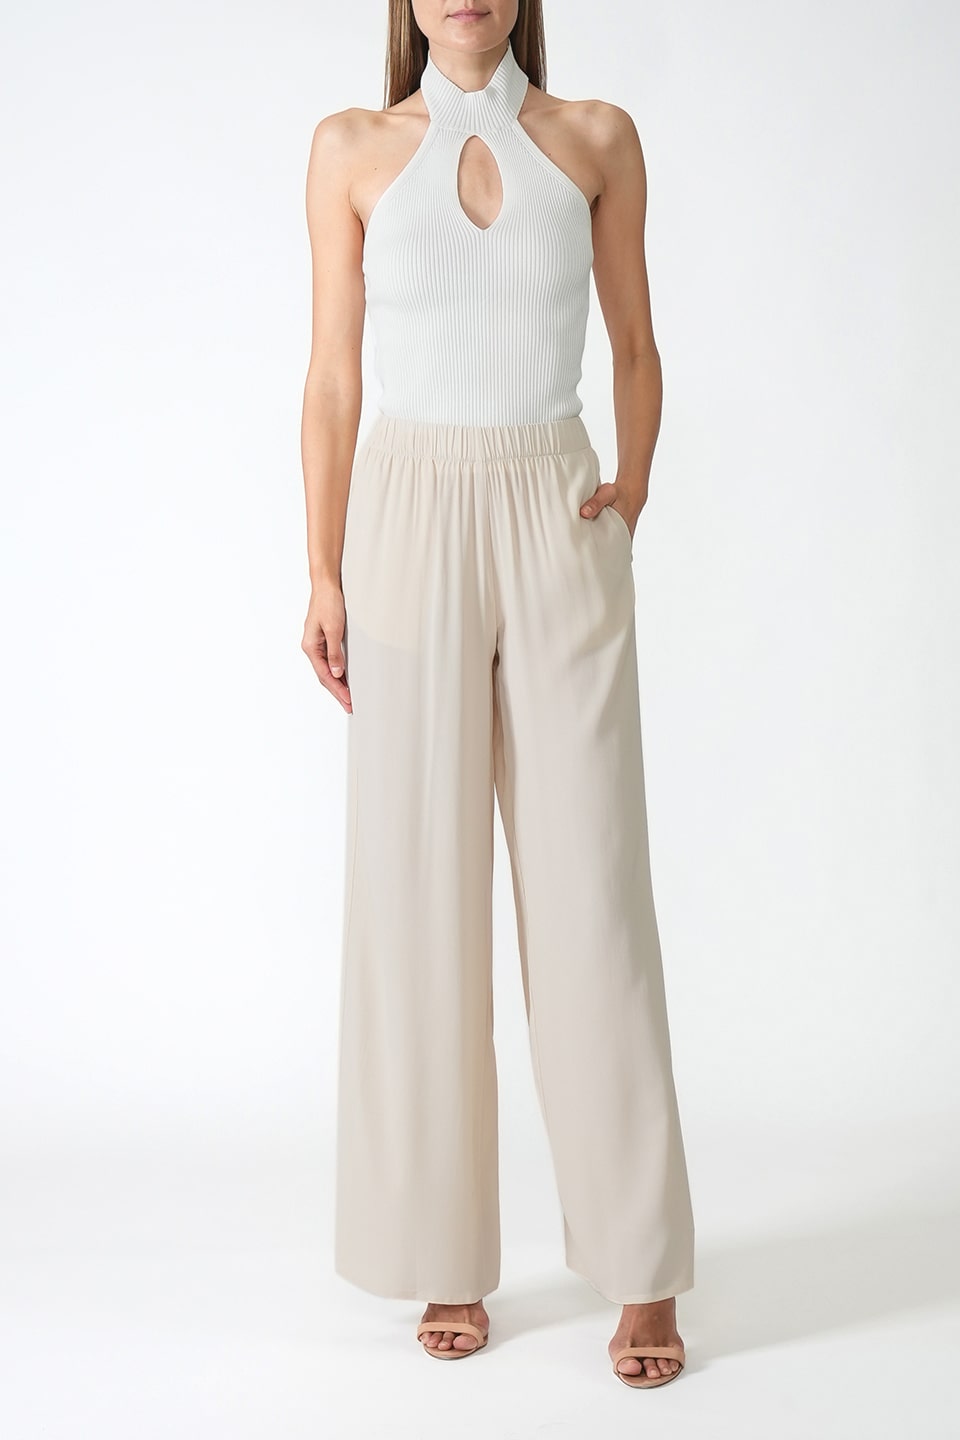 Designer Ivory Women pants, shop online with free delivery in UAE. Product gallery 2